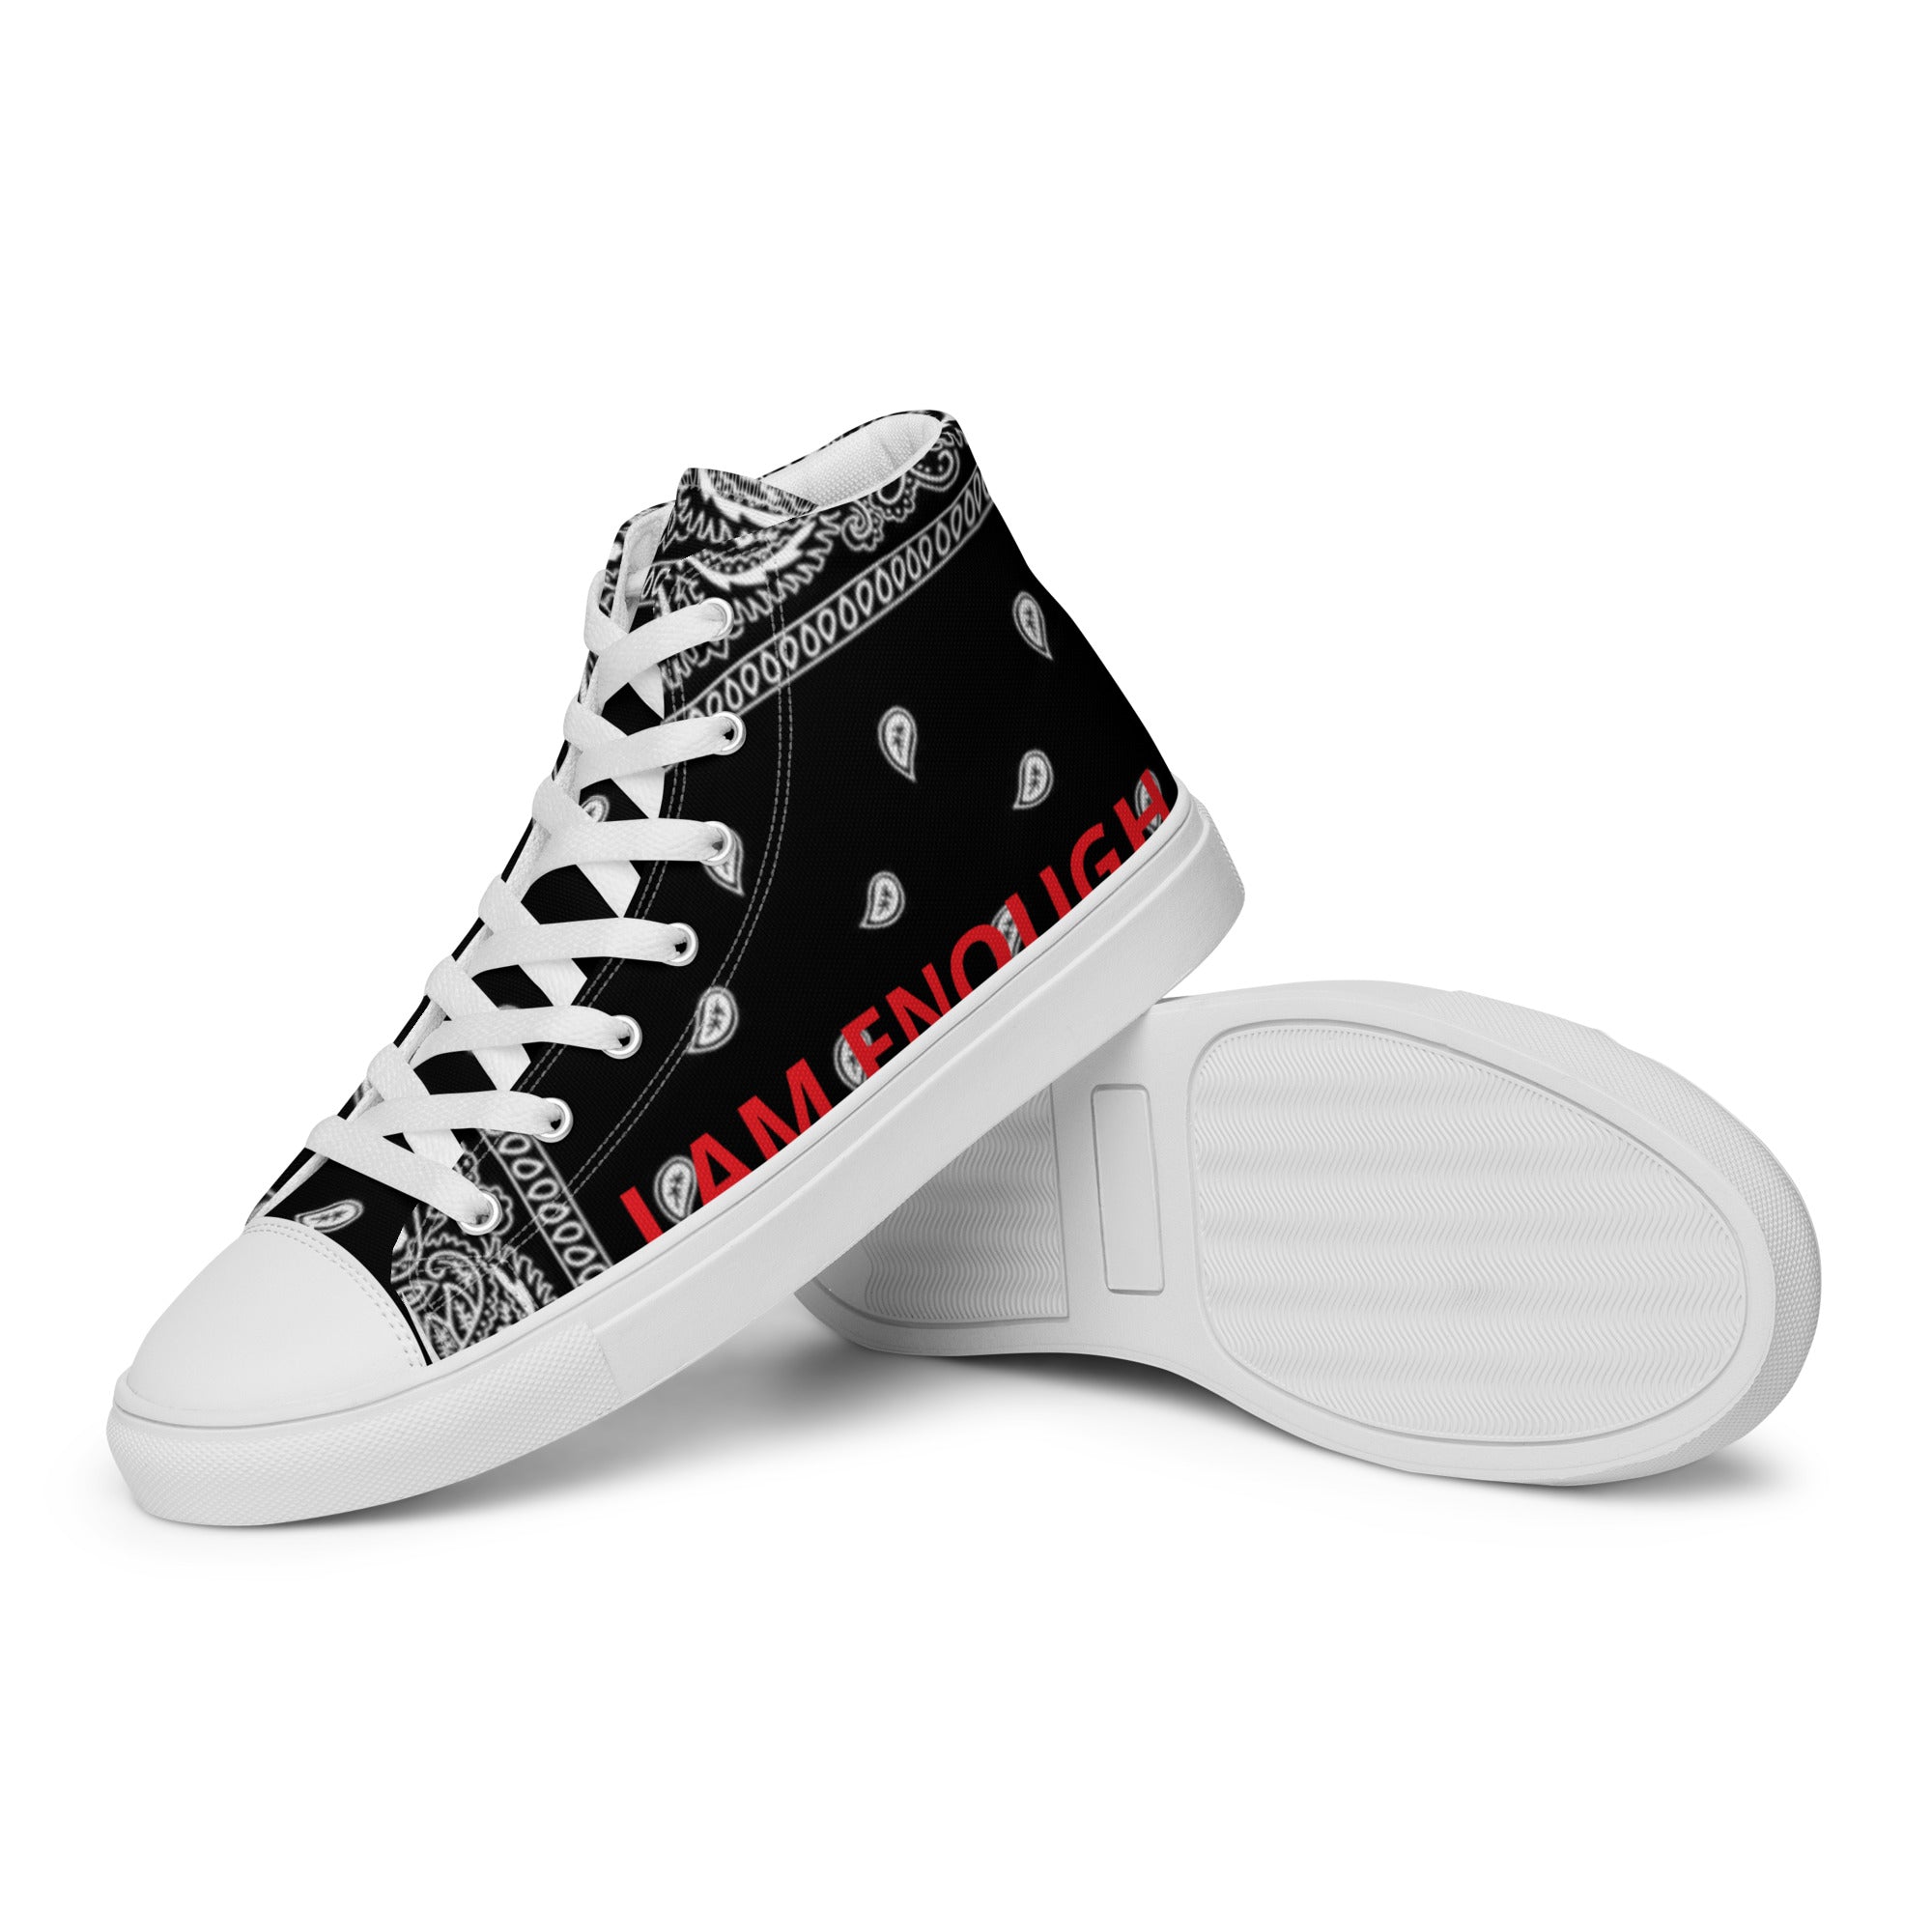 Truth Serum Clothing — Men's high top canvas shoes